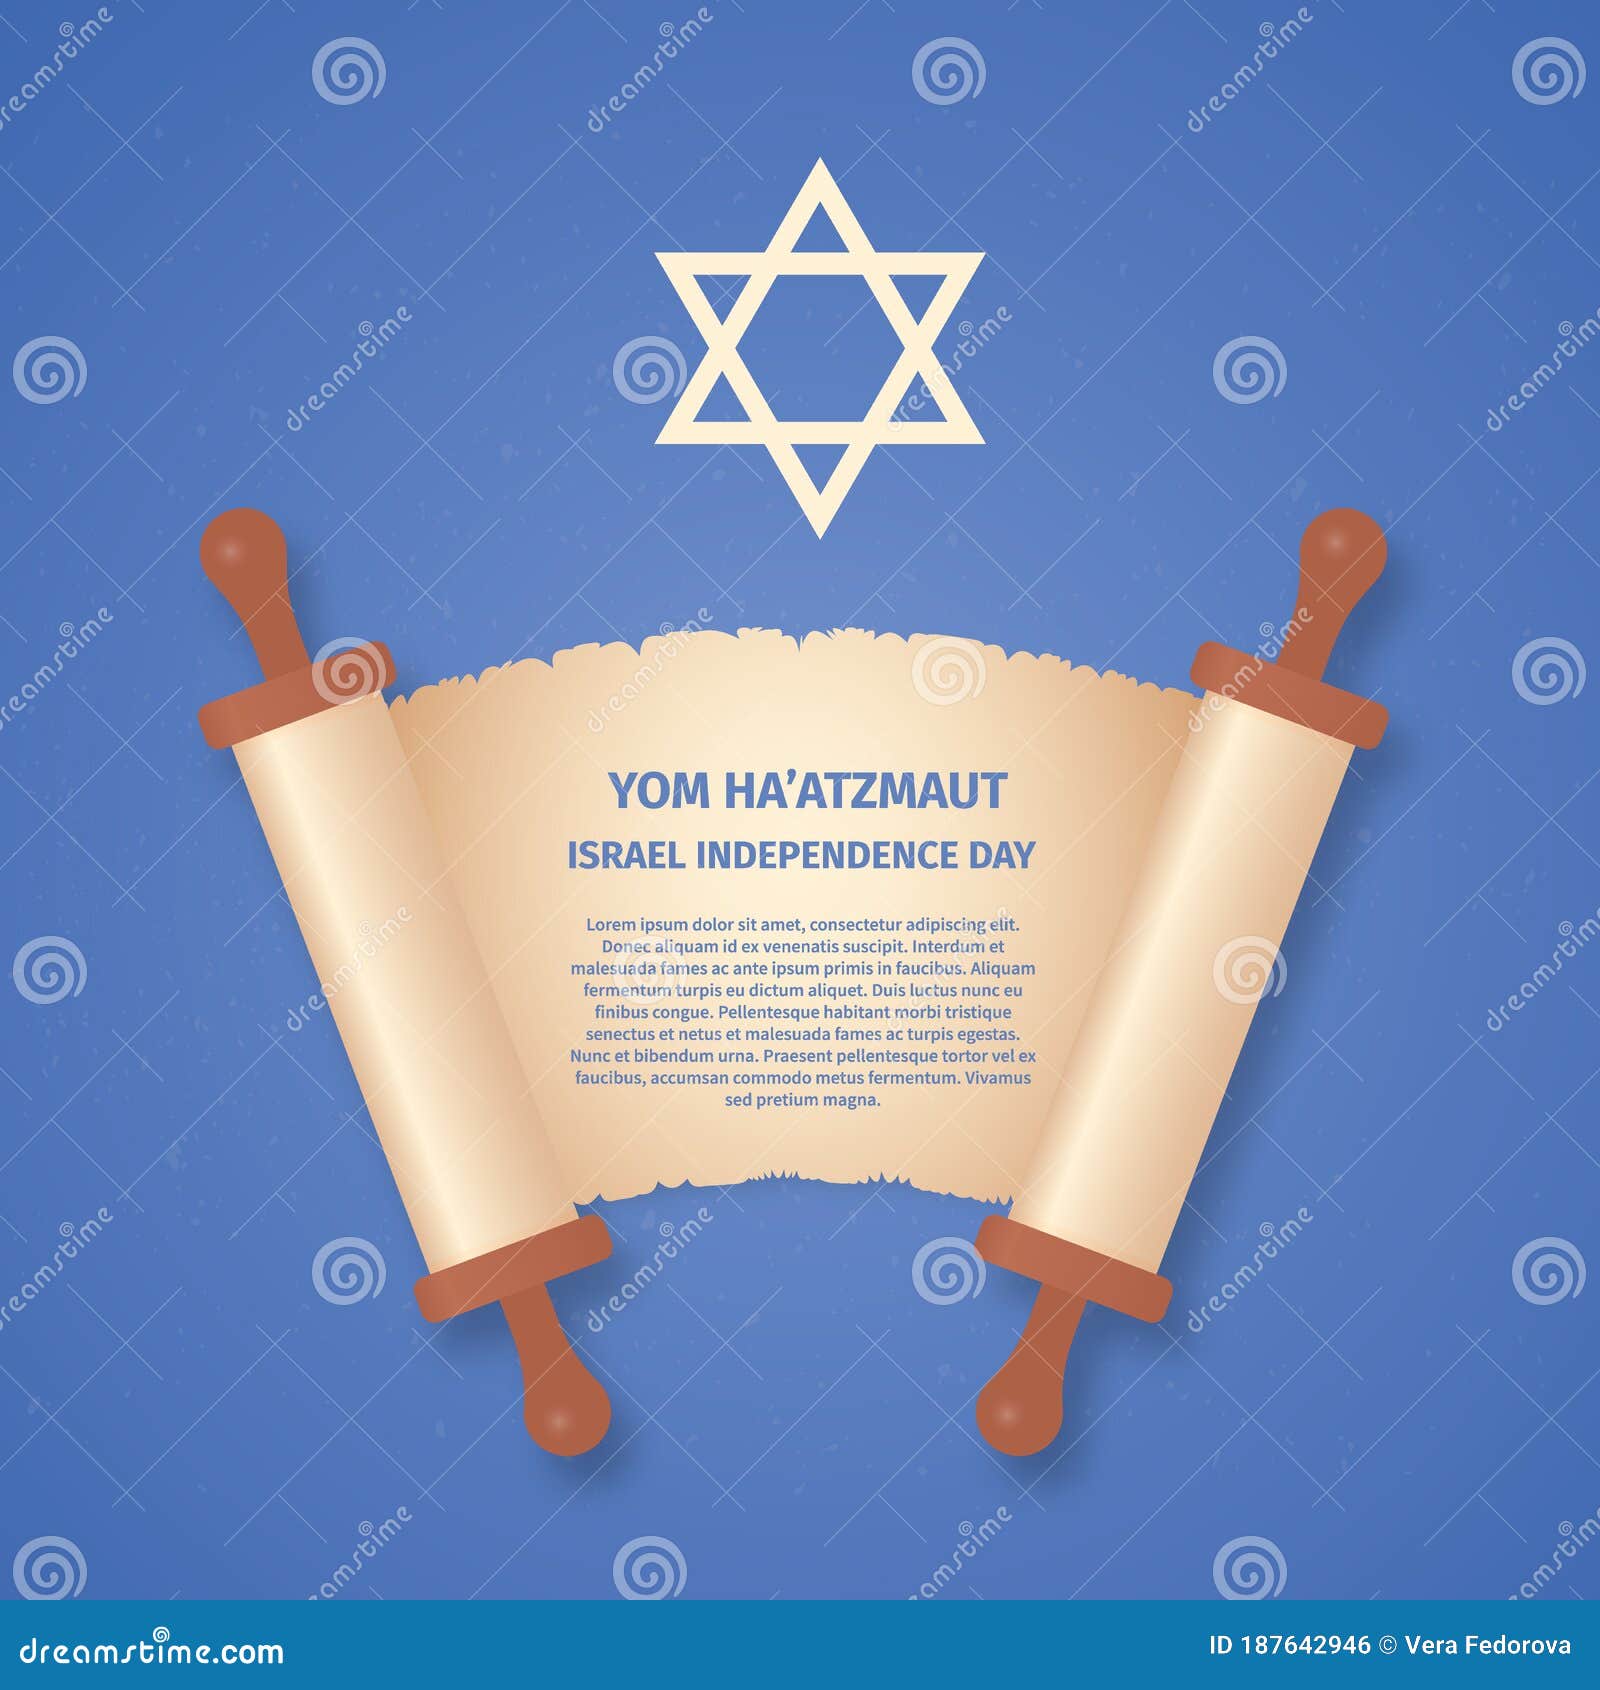 Israel Independence Day Yom Haatzmaut Old Scroll Paper And Star Of David Jewish Holiday Vector Illustration Easy To Edit Stock Vector Illustration Of Memorial Independence 187642946